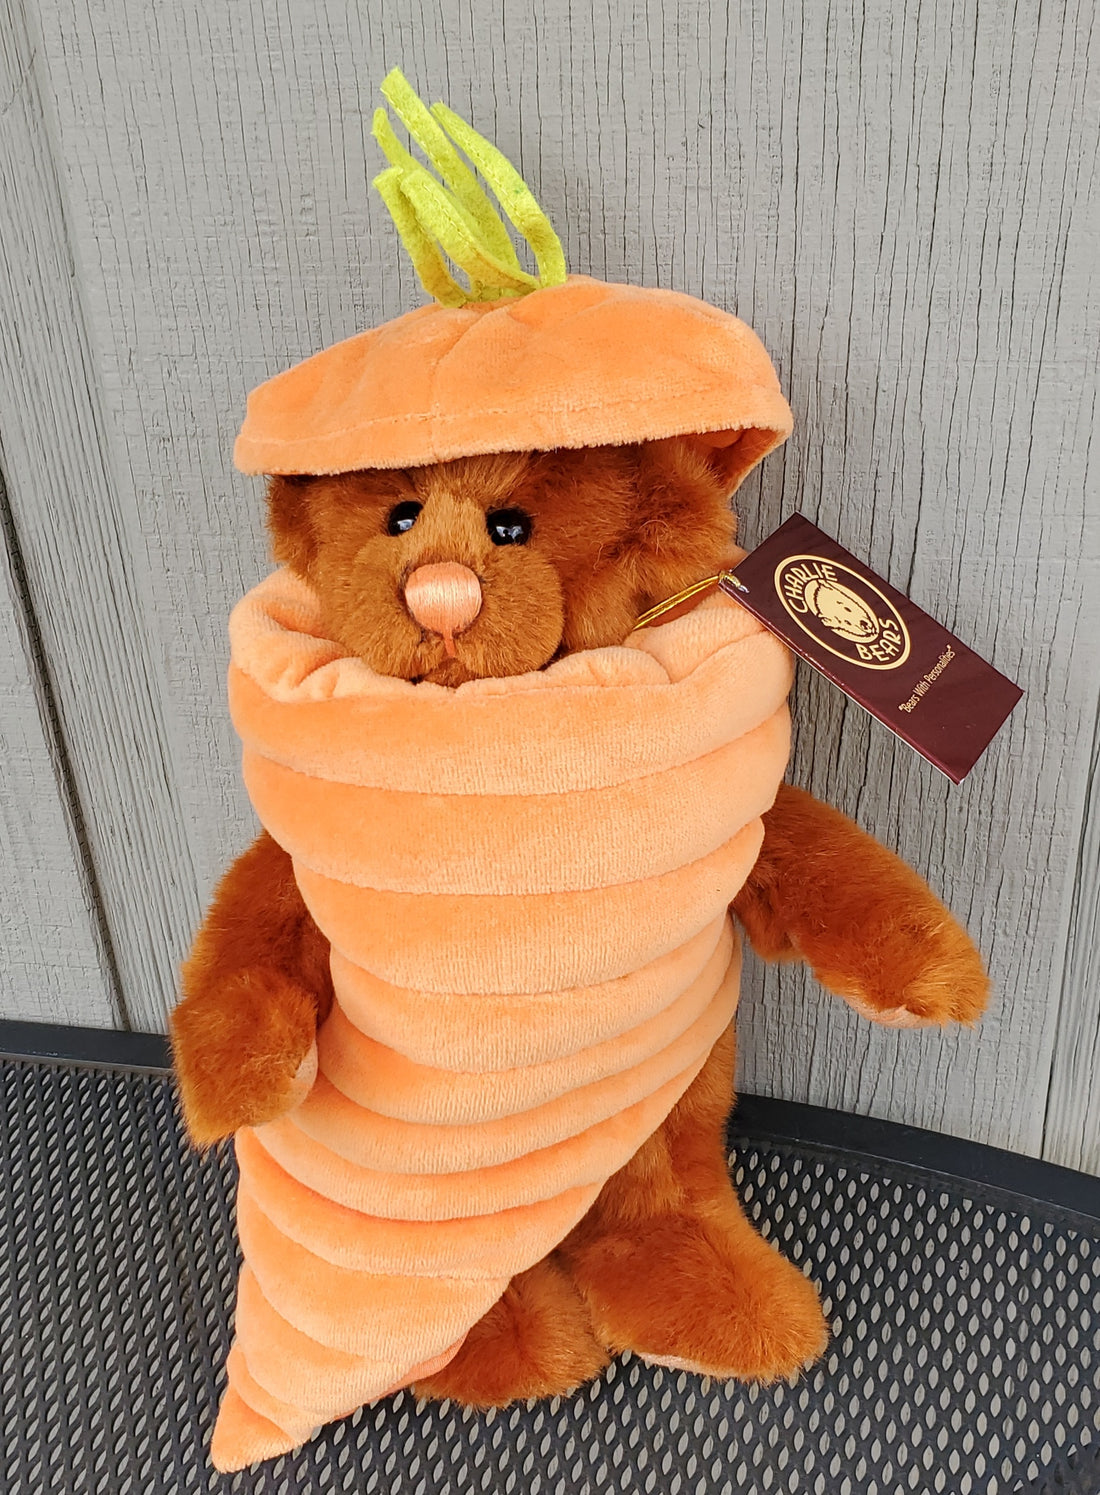 Chantenay - 11" Bear with Carrot Coat and Hat!